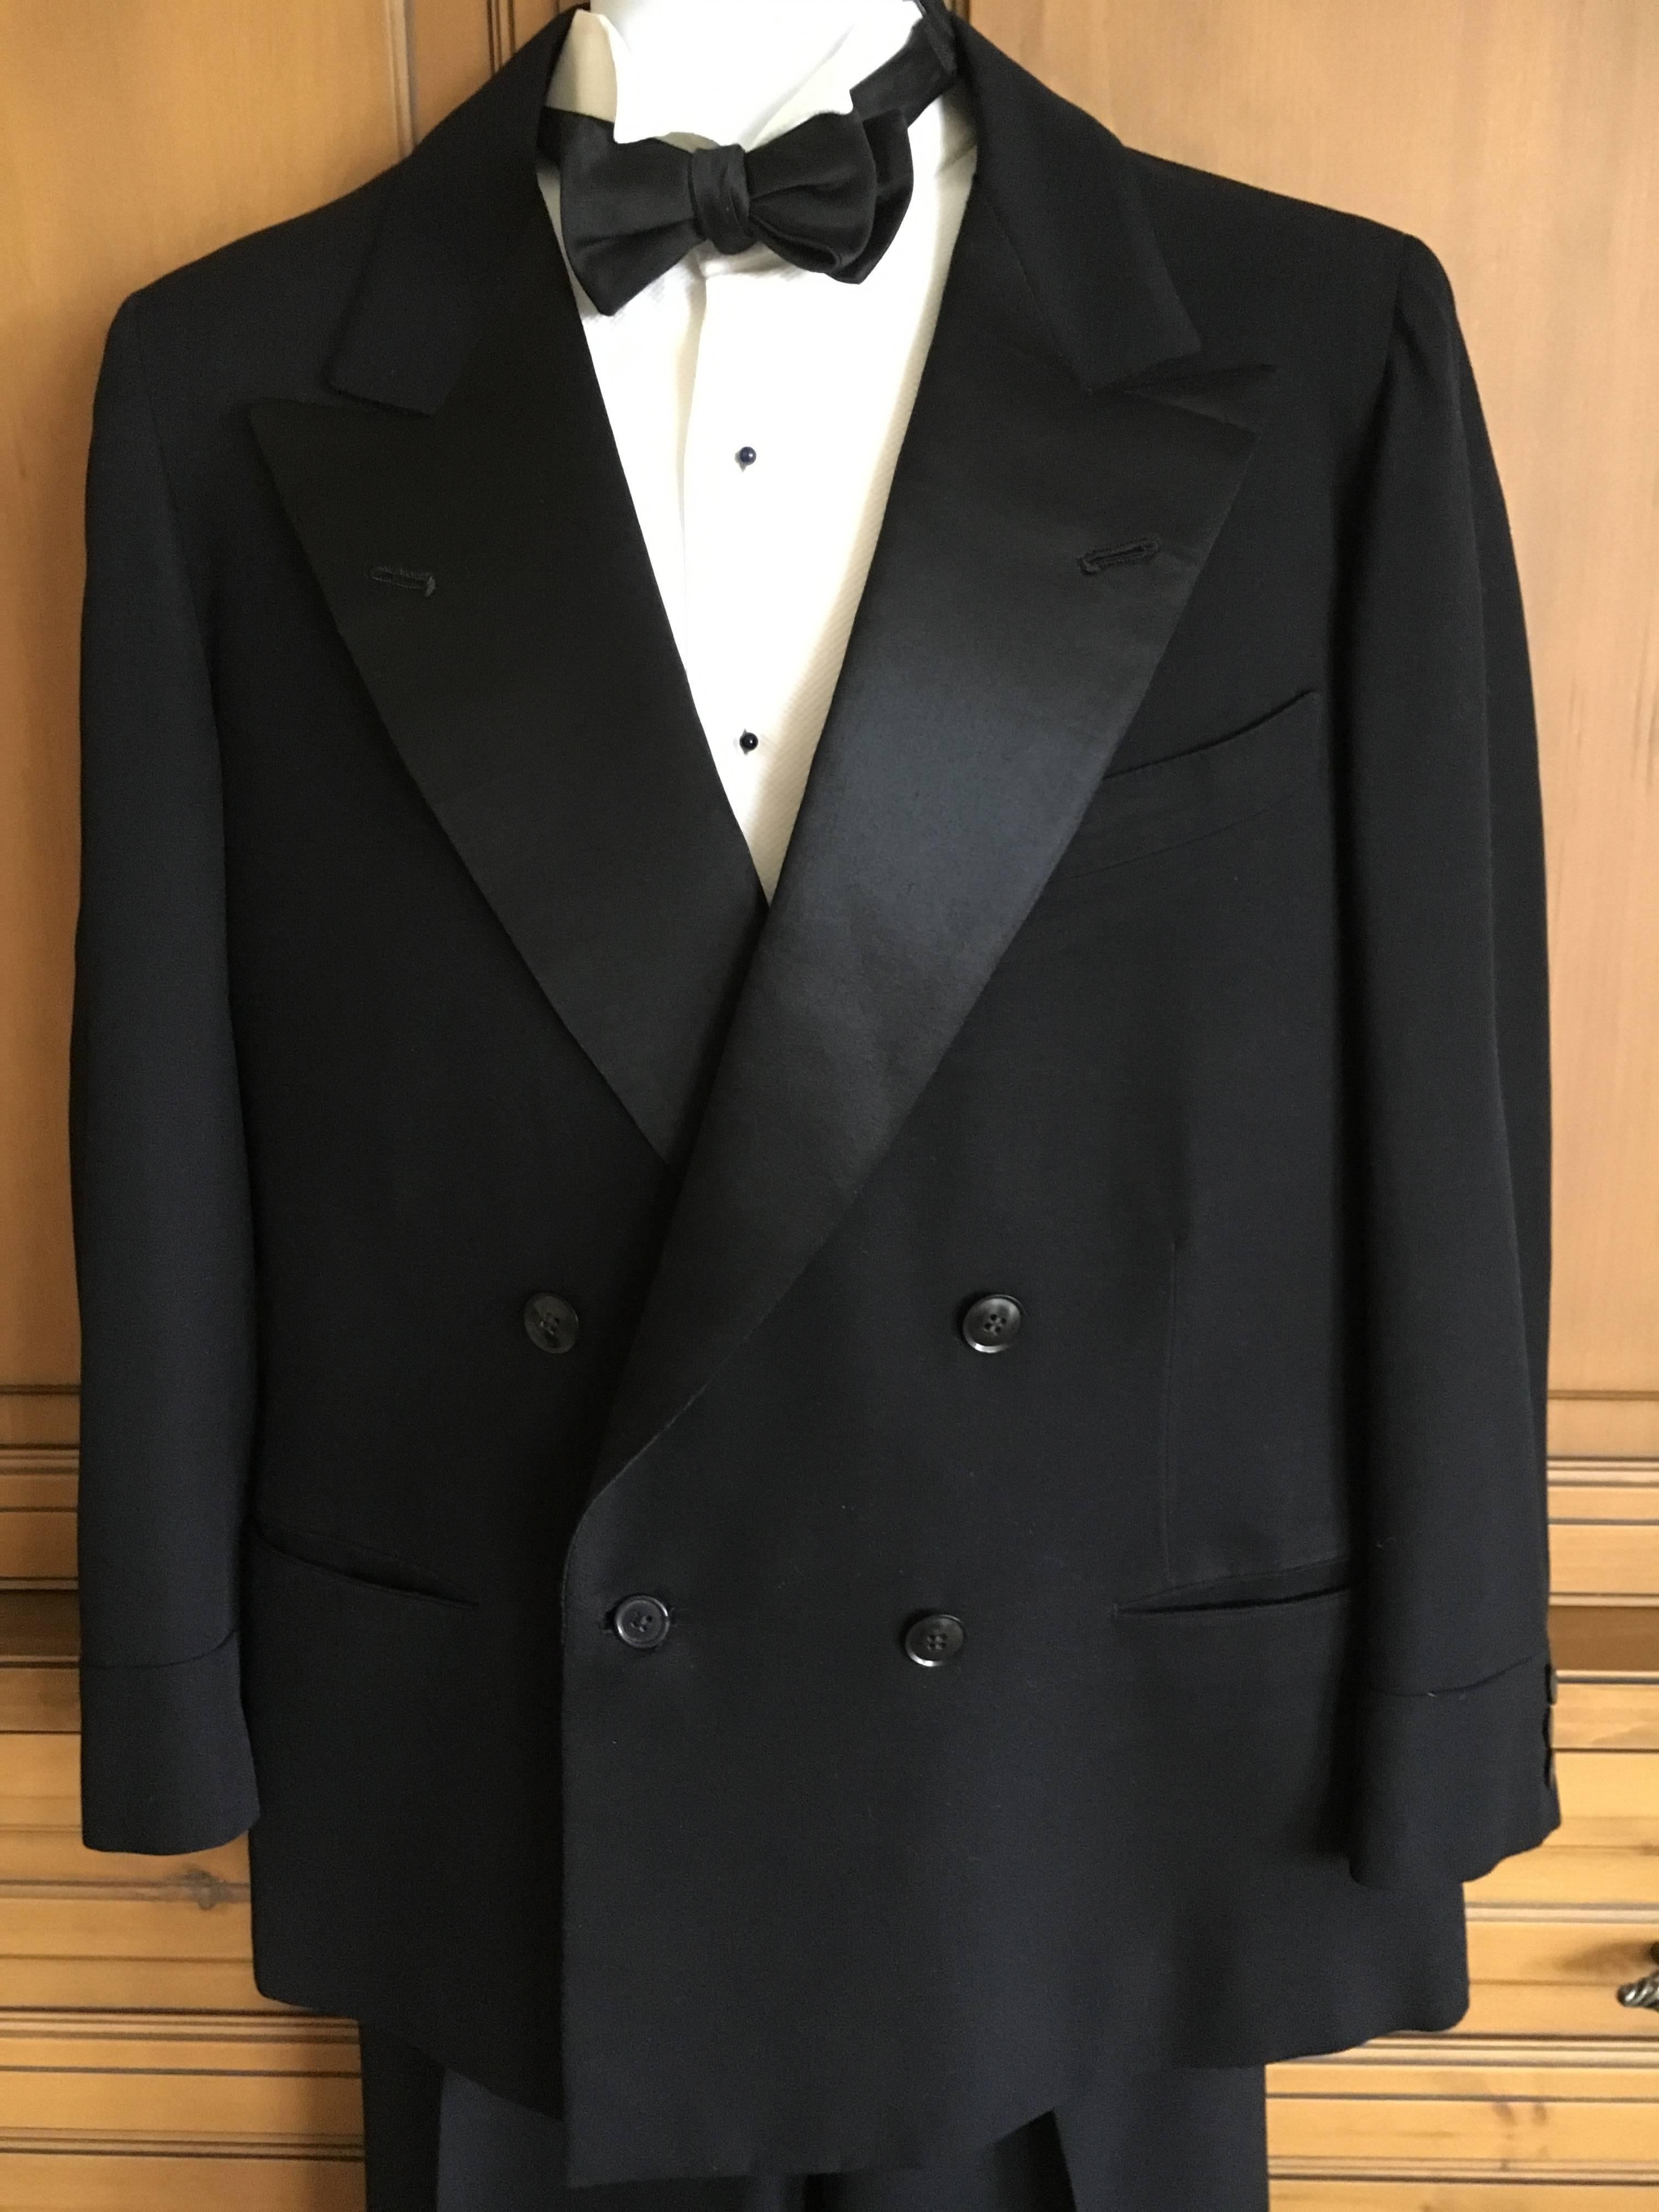 1936 Gentleman's Peak Satin Lapel Tuxedo from Society Tailor F.L. Dunne & Co. NY For Sale 1